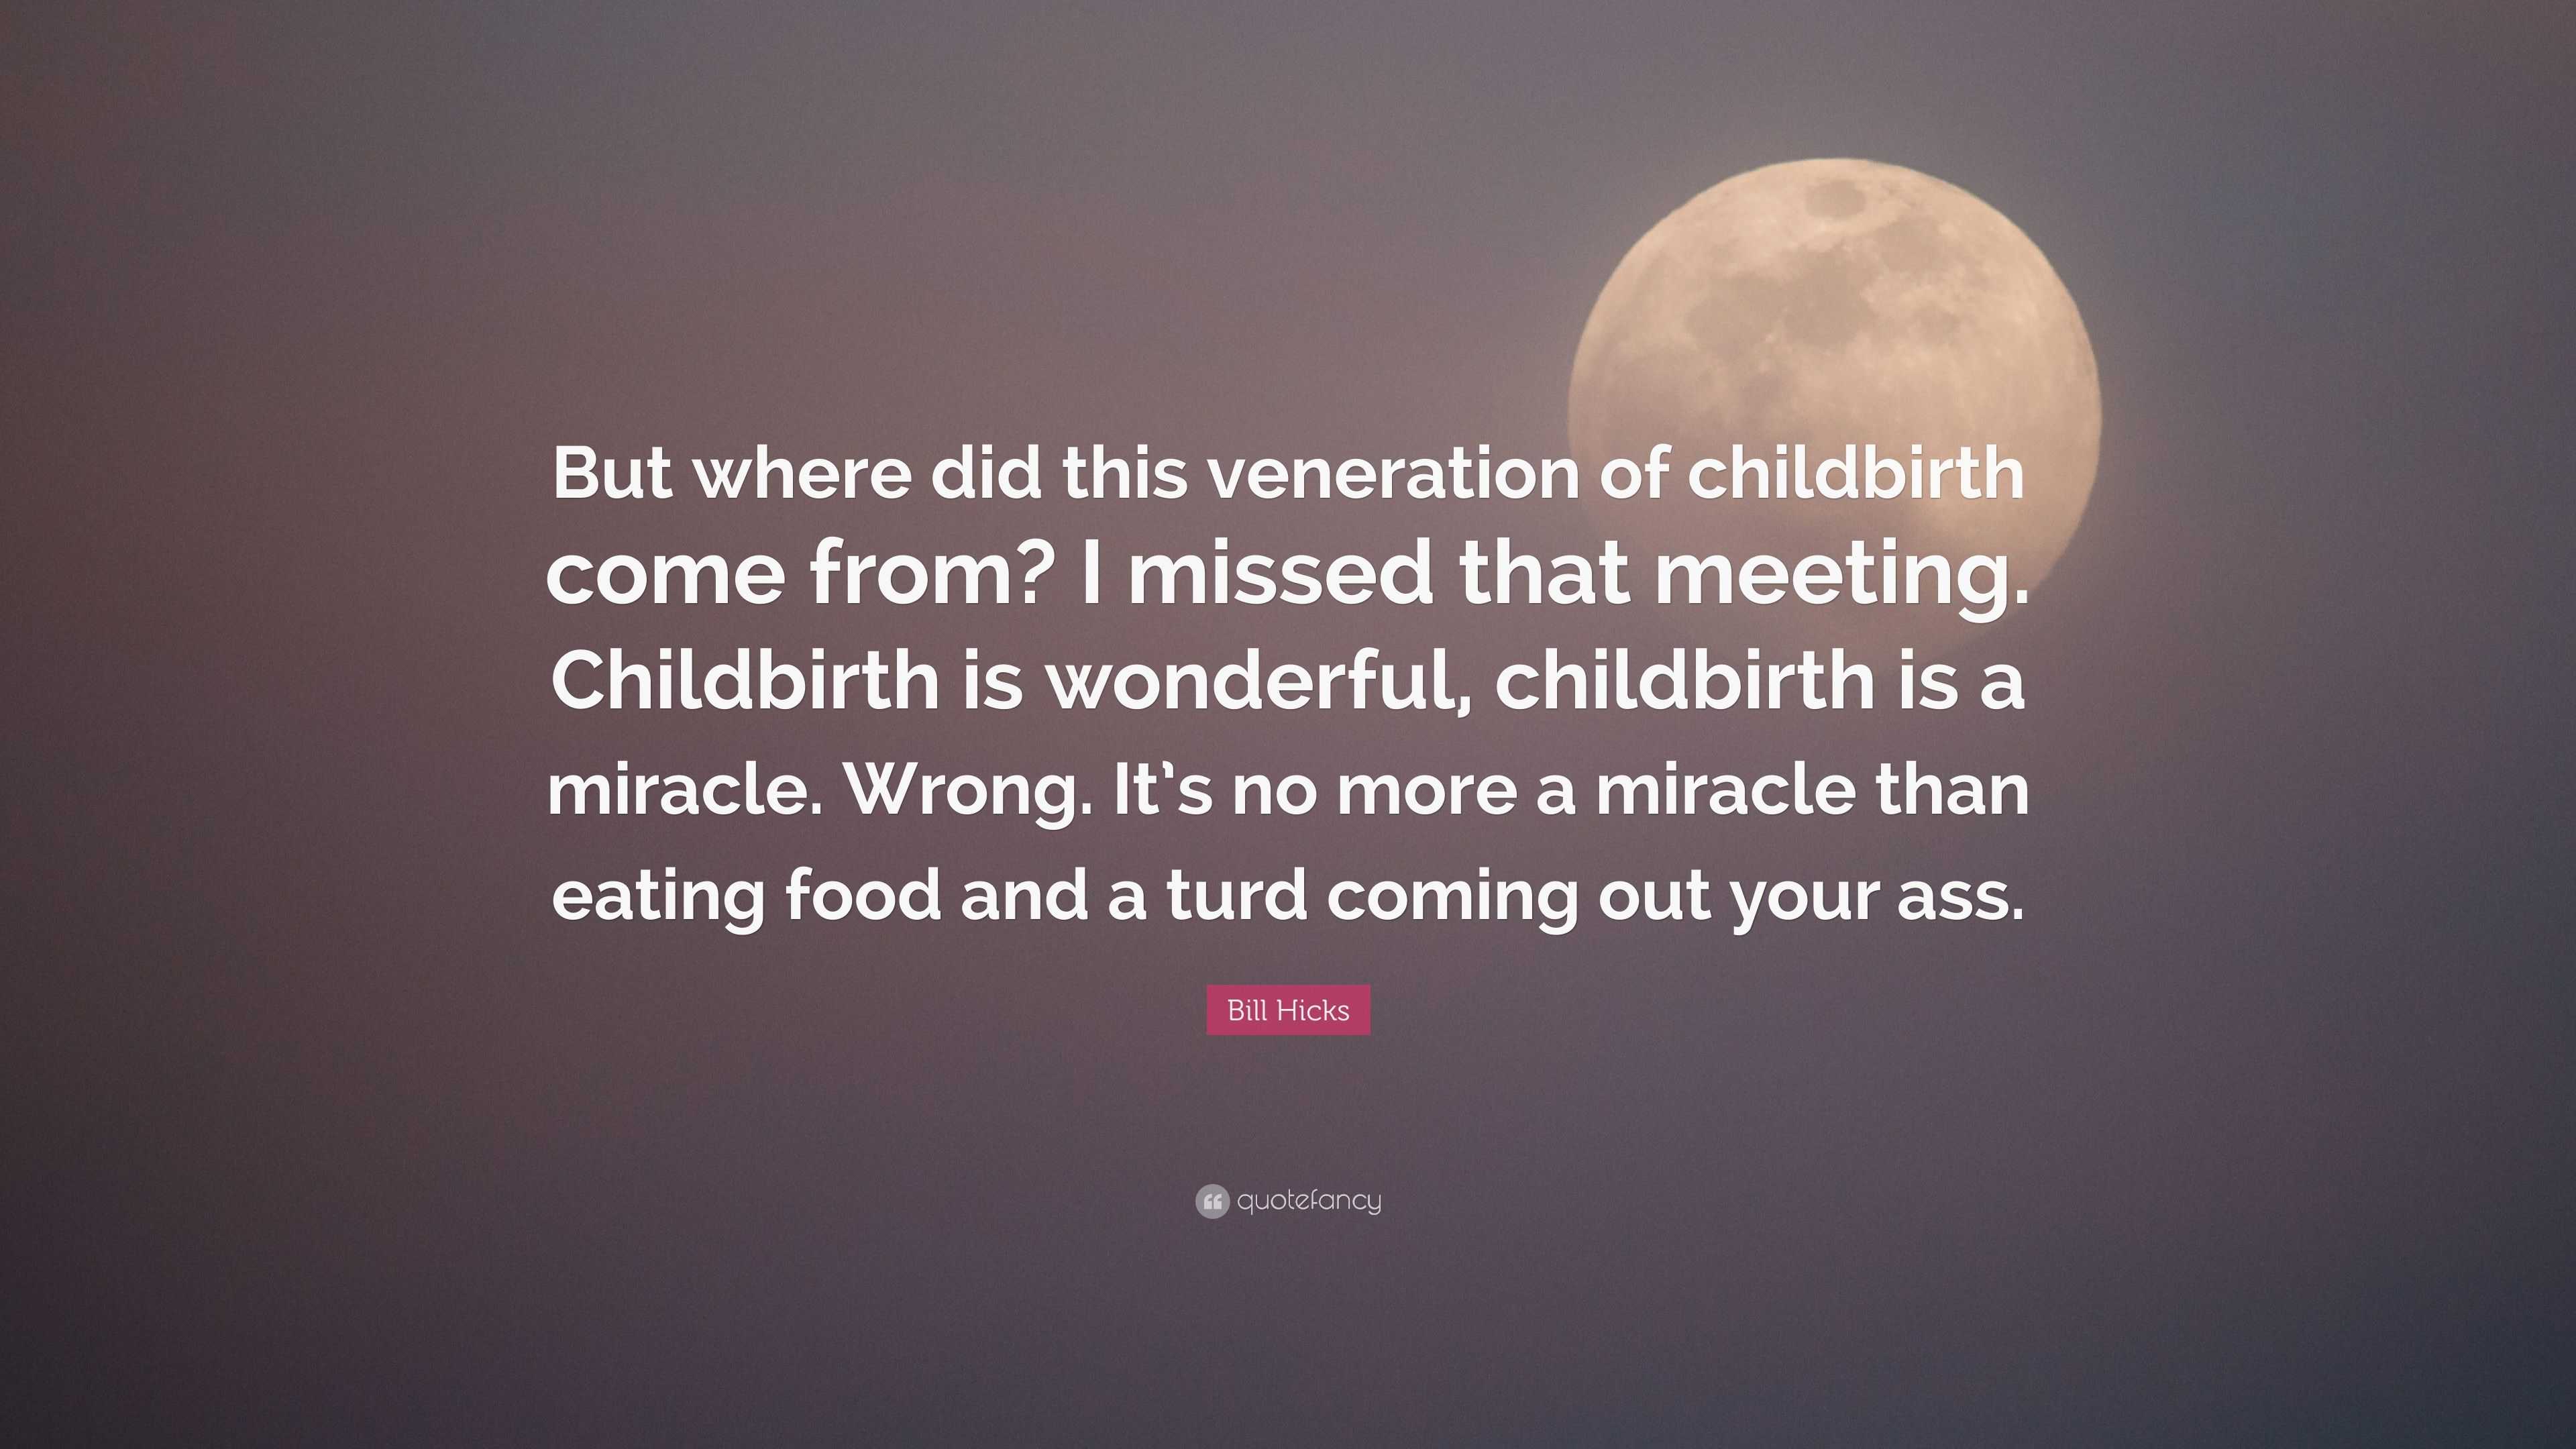 Best Bill Hicks Quotes On Childbirth in the world Learn more here 